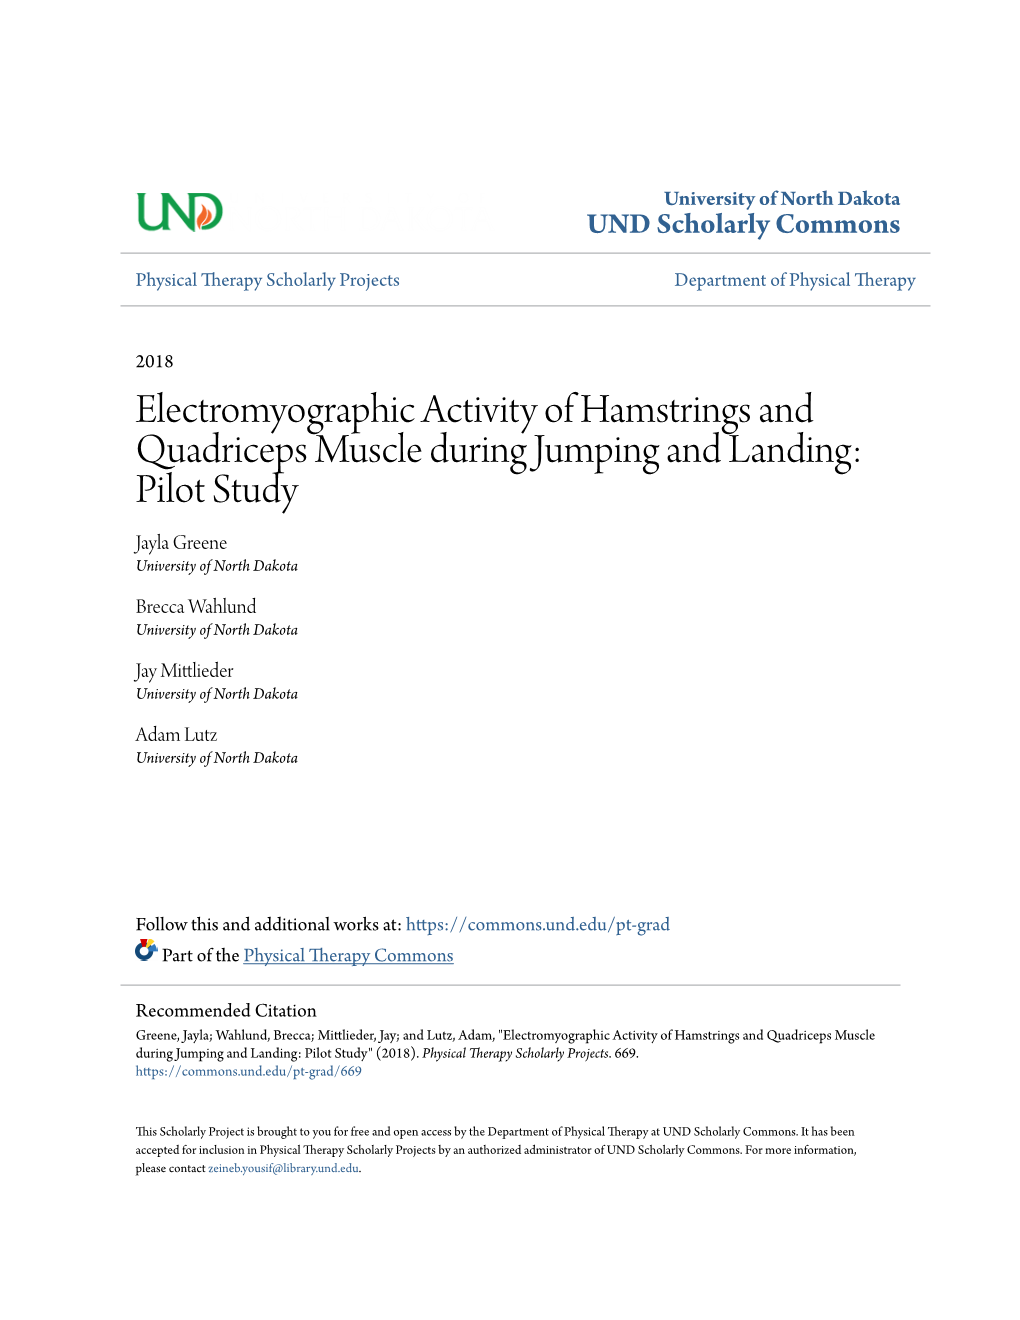 Electromyographic Activity of Hamstrings and Quadriceps Muscle During Jumping and Landing: Pilot Study Jayla Greene University of North Dakota